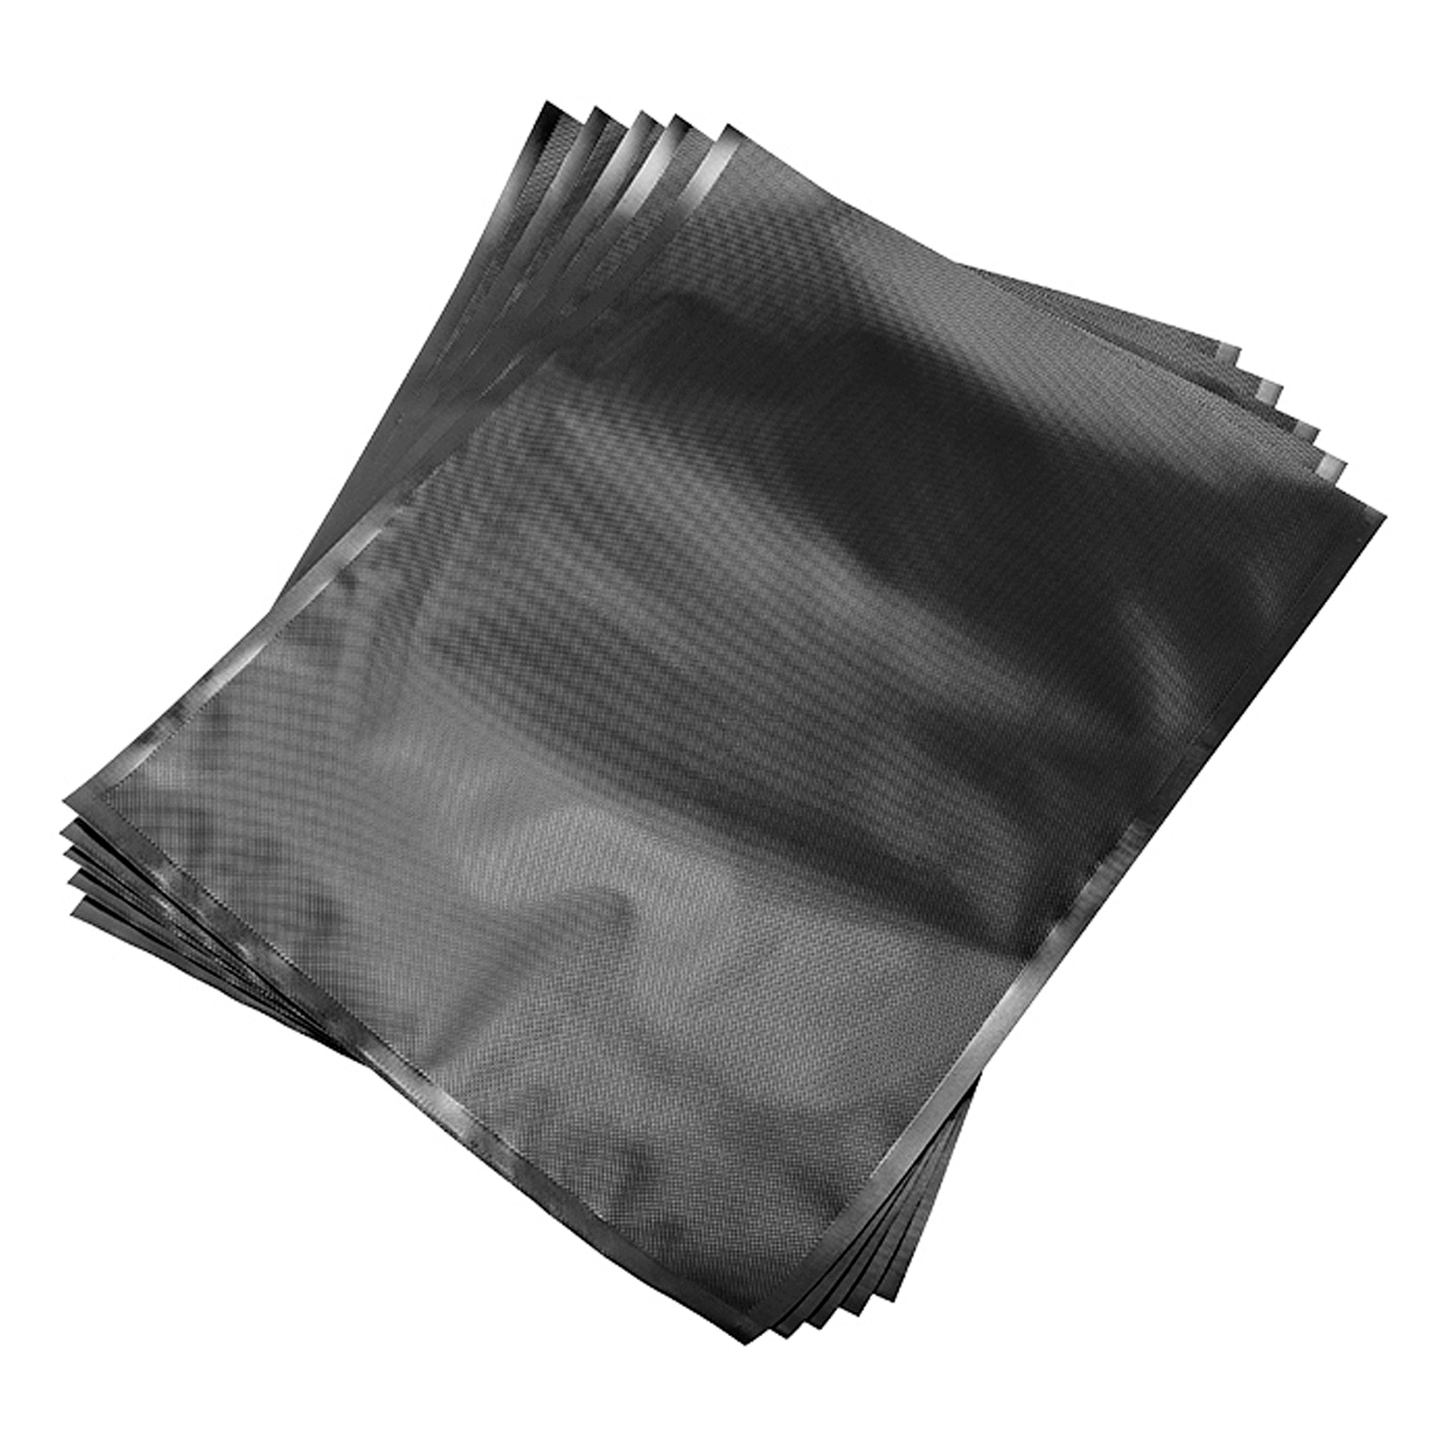 ArmorVac 11"x24" 5mil Precut Vacuum Seal Bags All Black (100 Pack) 131124BK Harvest & Extraction